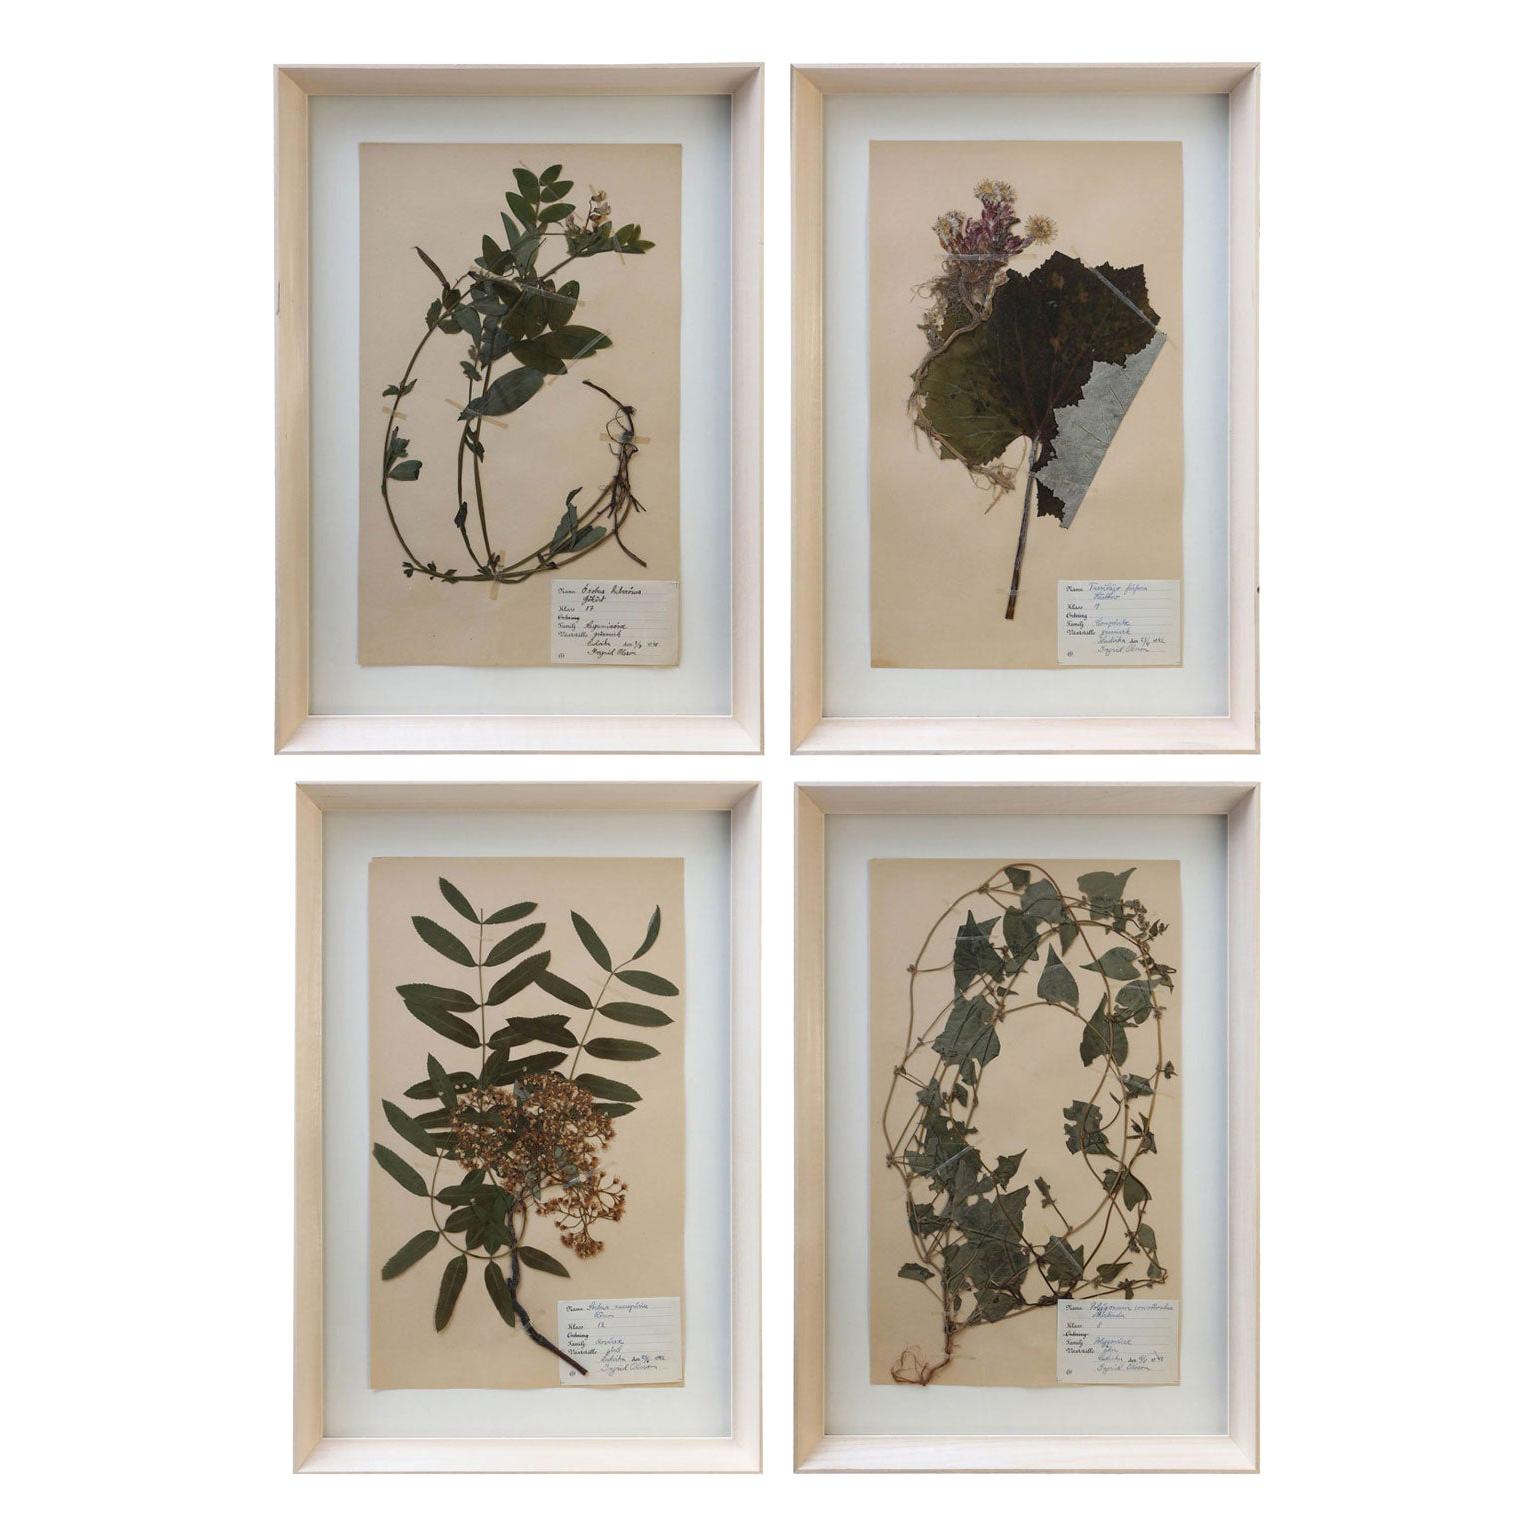 Vintage Swedish herbaria, newly framed in unfinished maple, (circa 1930-1950). Each float-mounted herbarium (botanical) measures: 15.75 inches high x 9.5 inches wide. Sold individually and priced $695 each. Twenty available - see all five listings